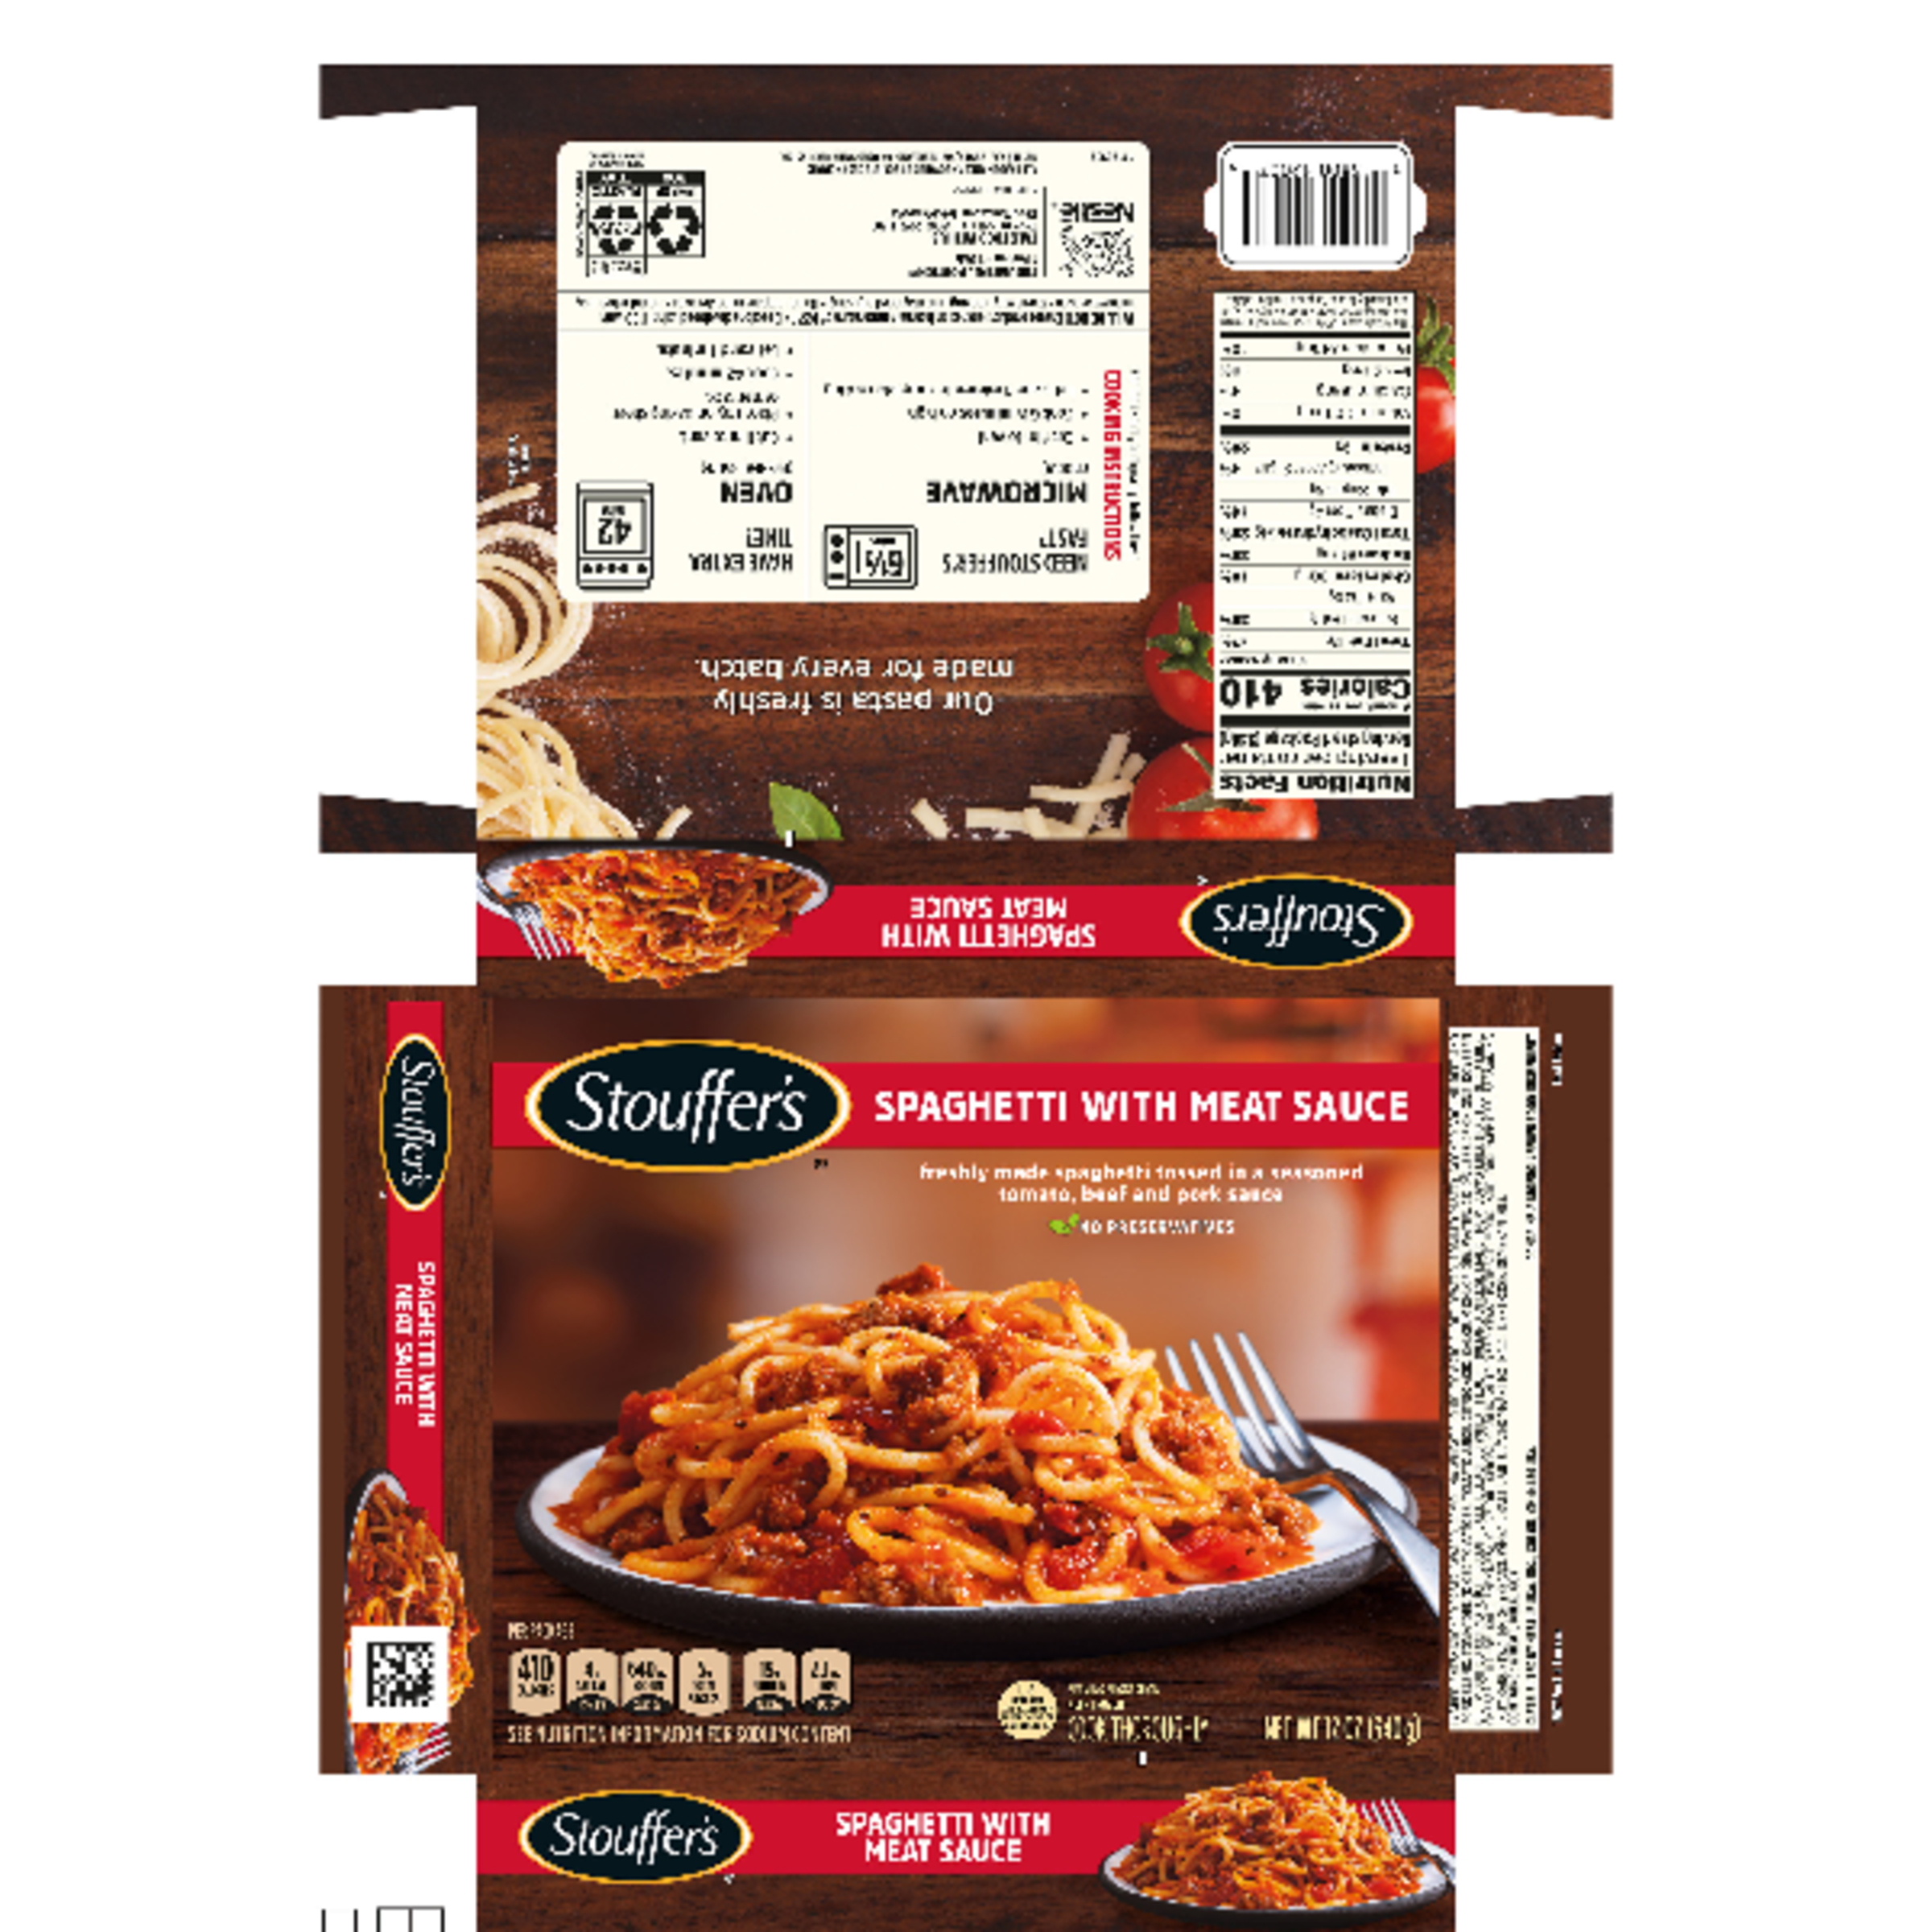 STOUFFER'S Spaghetti with Meat Sauce 12 units per case 12.0 oz Product Label